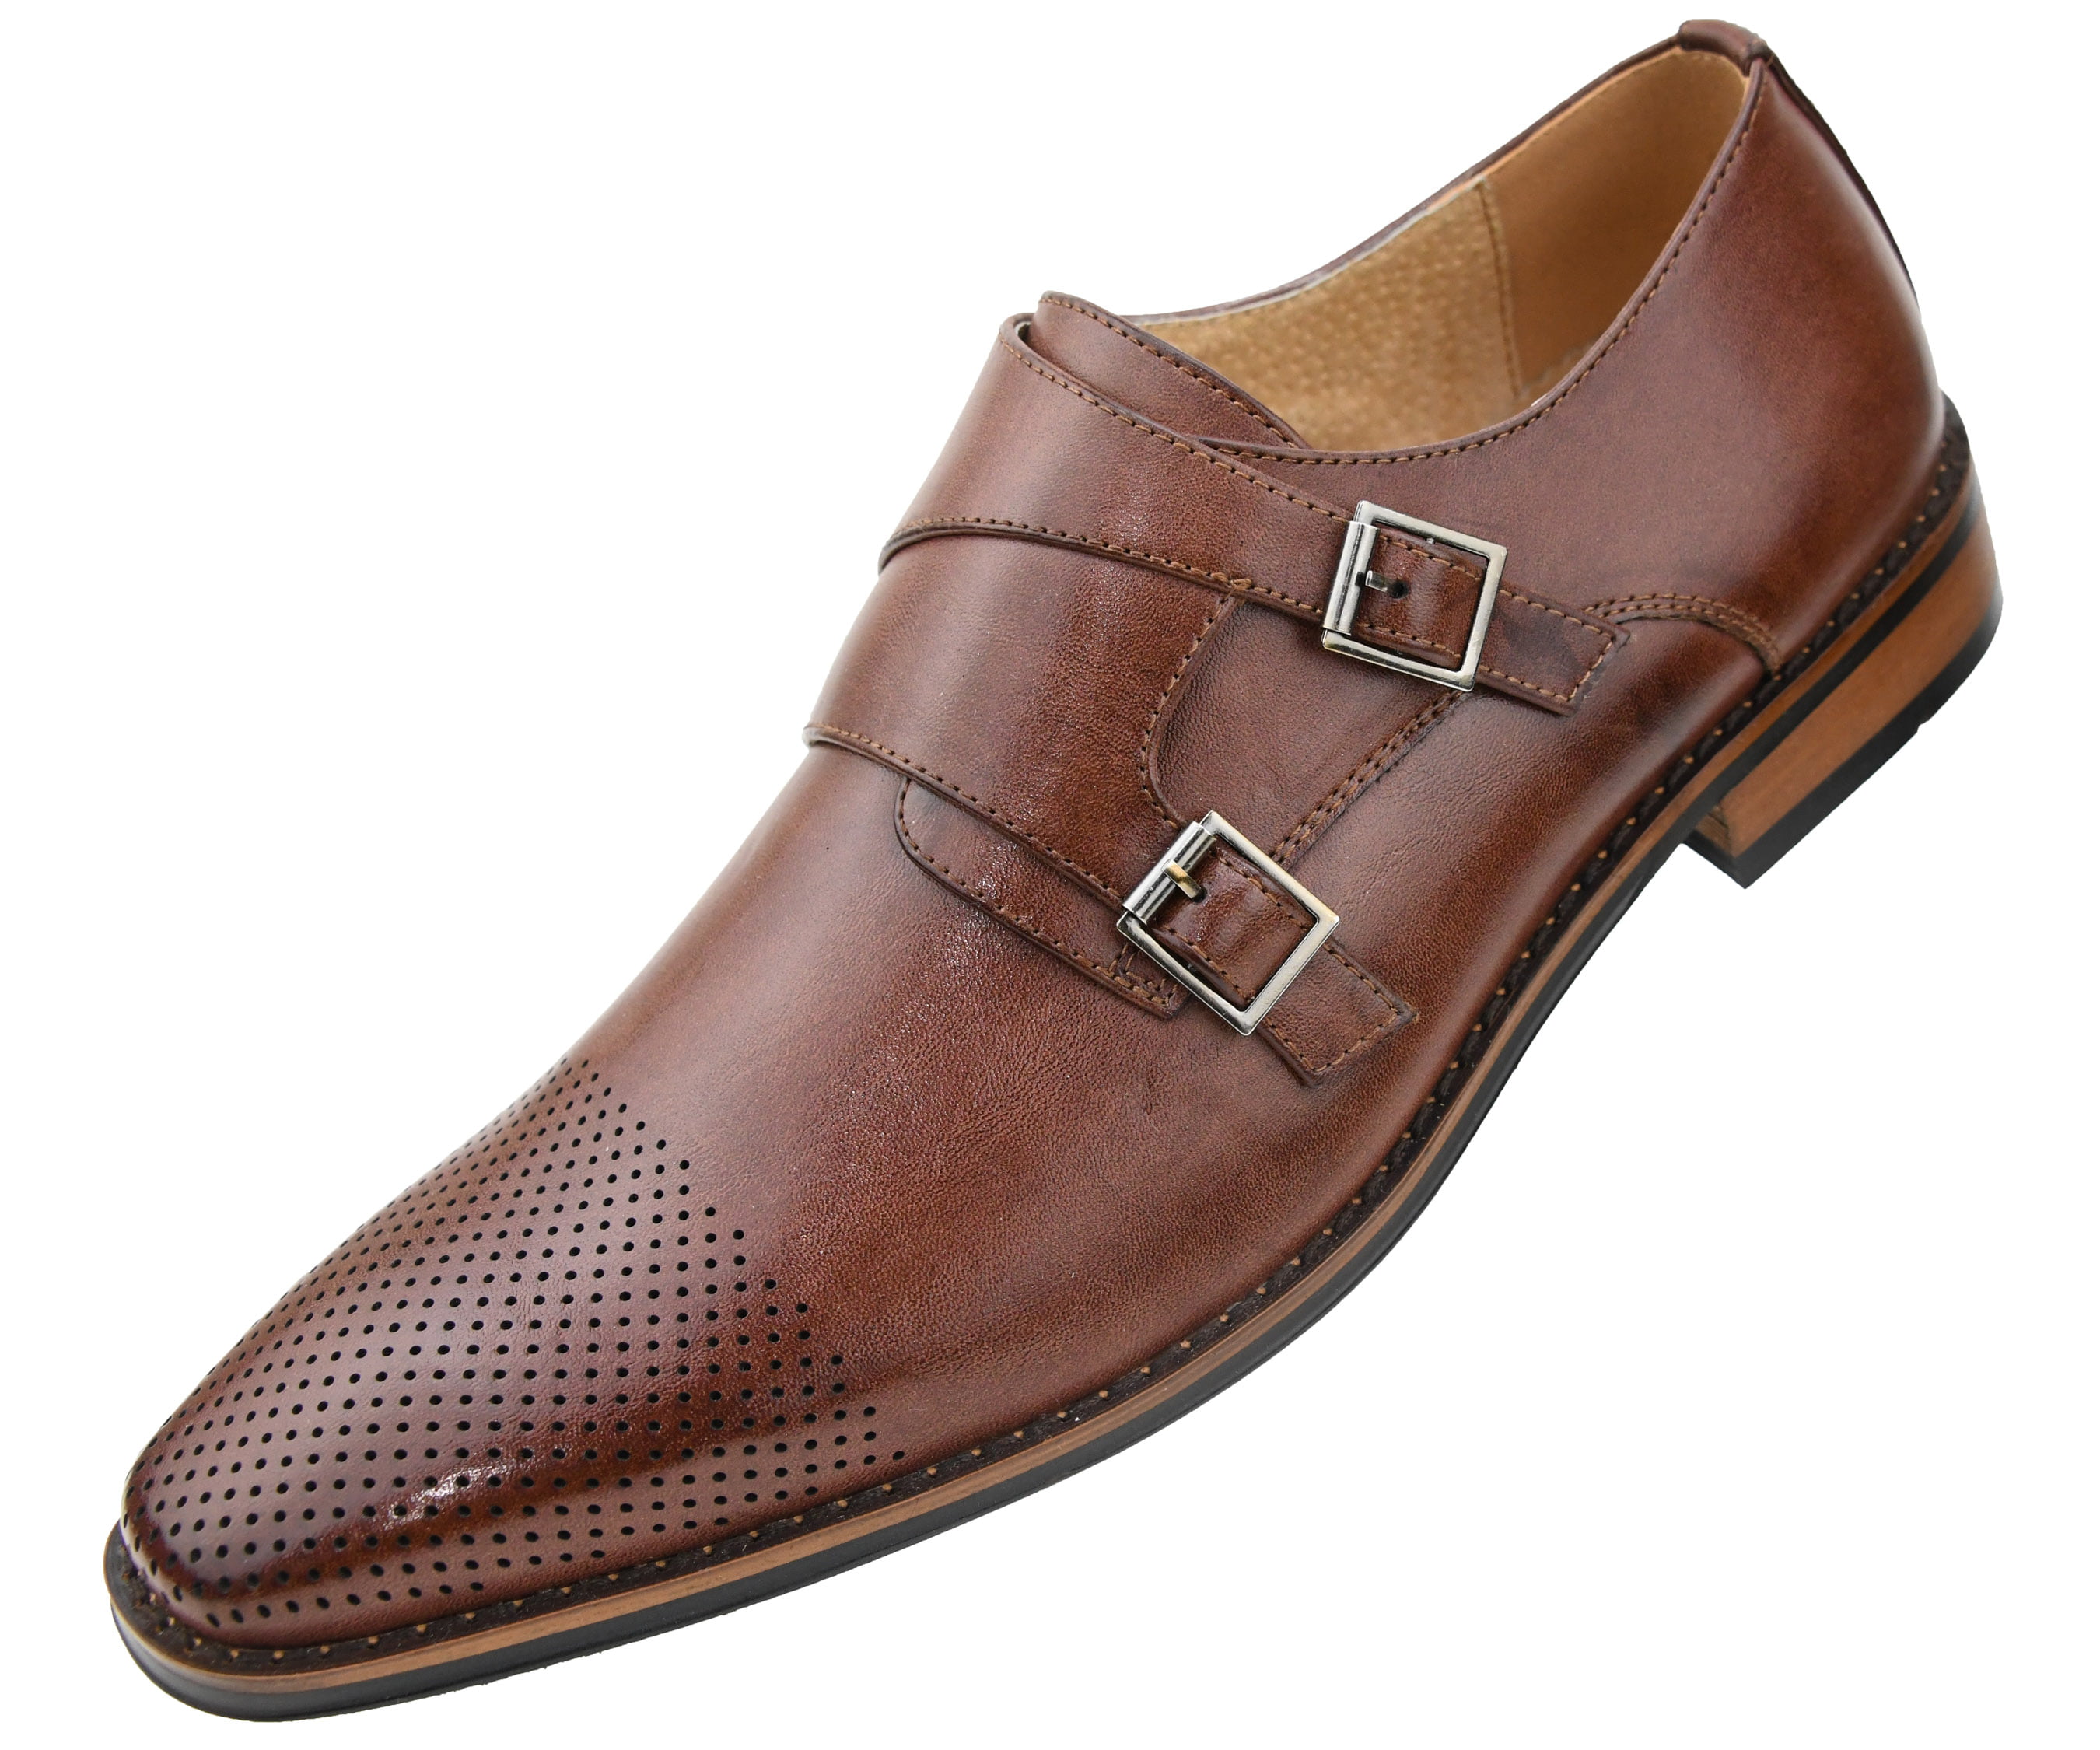 Men's Perforated Cap Toe Double Monk Strap Slip On Dress Shoes " preowned " 